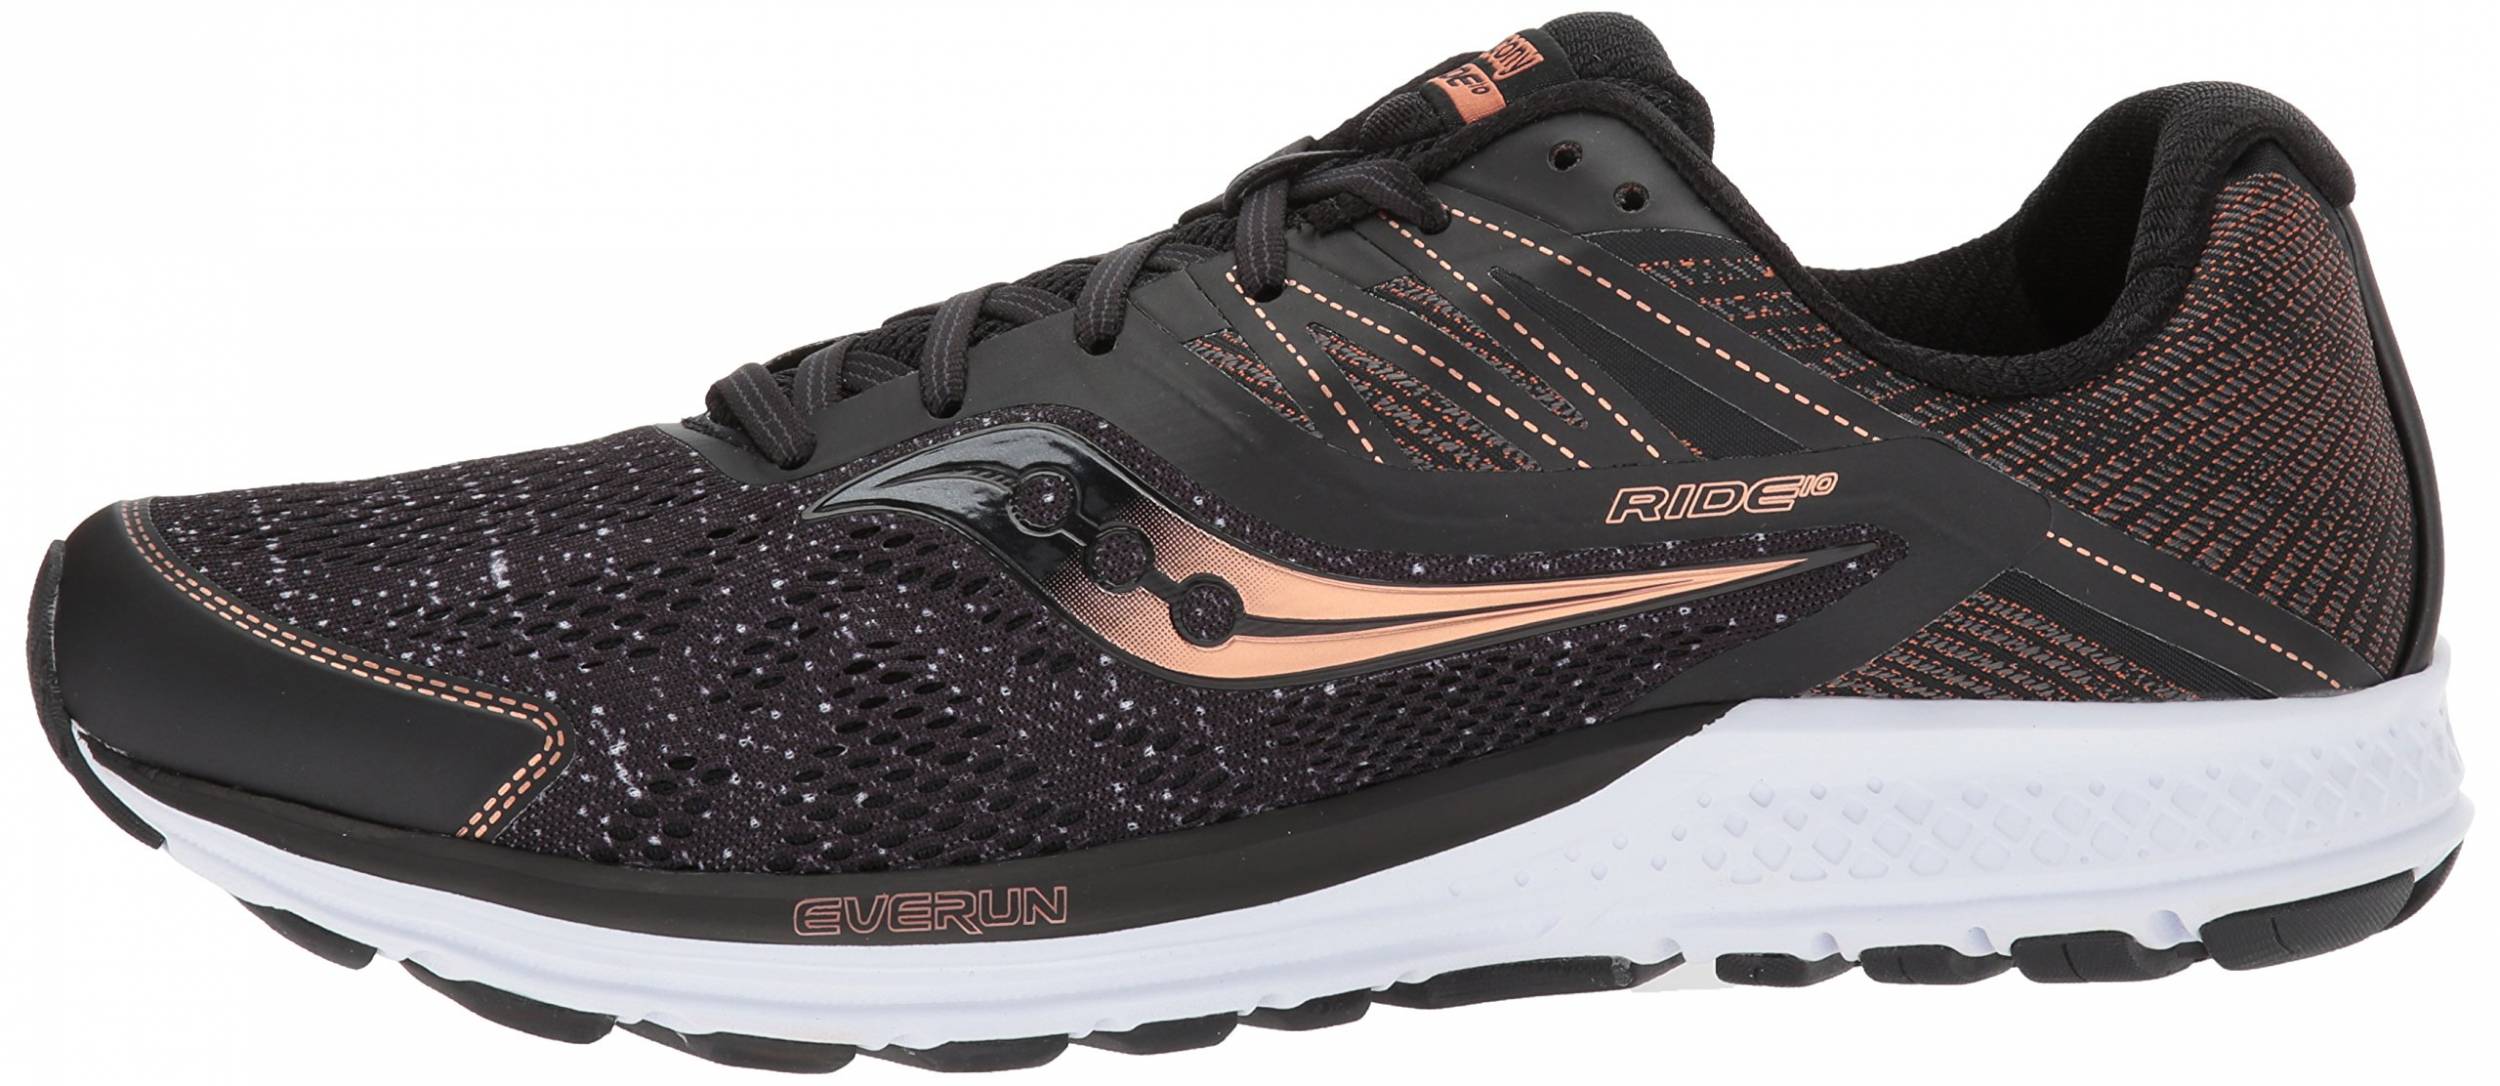 Only £63 + Review of Saucony Ride 10 